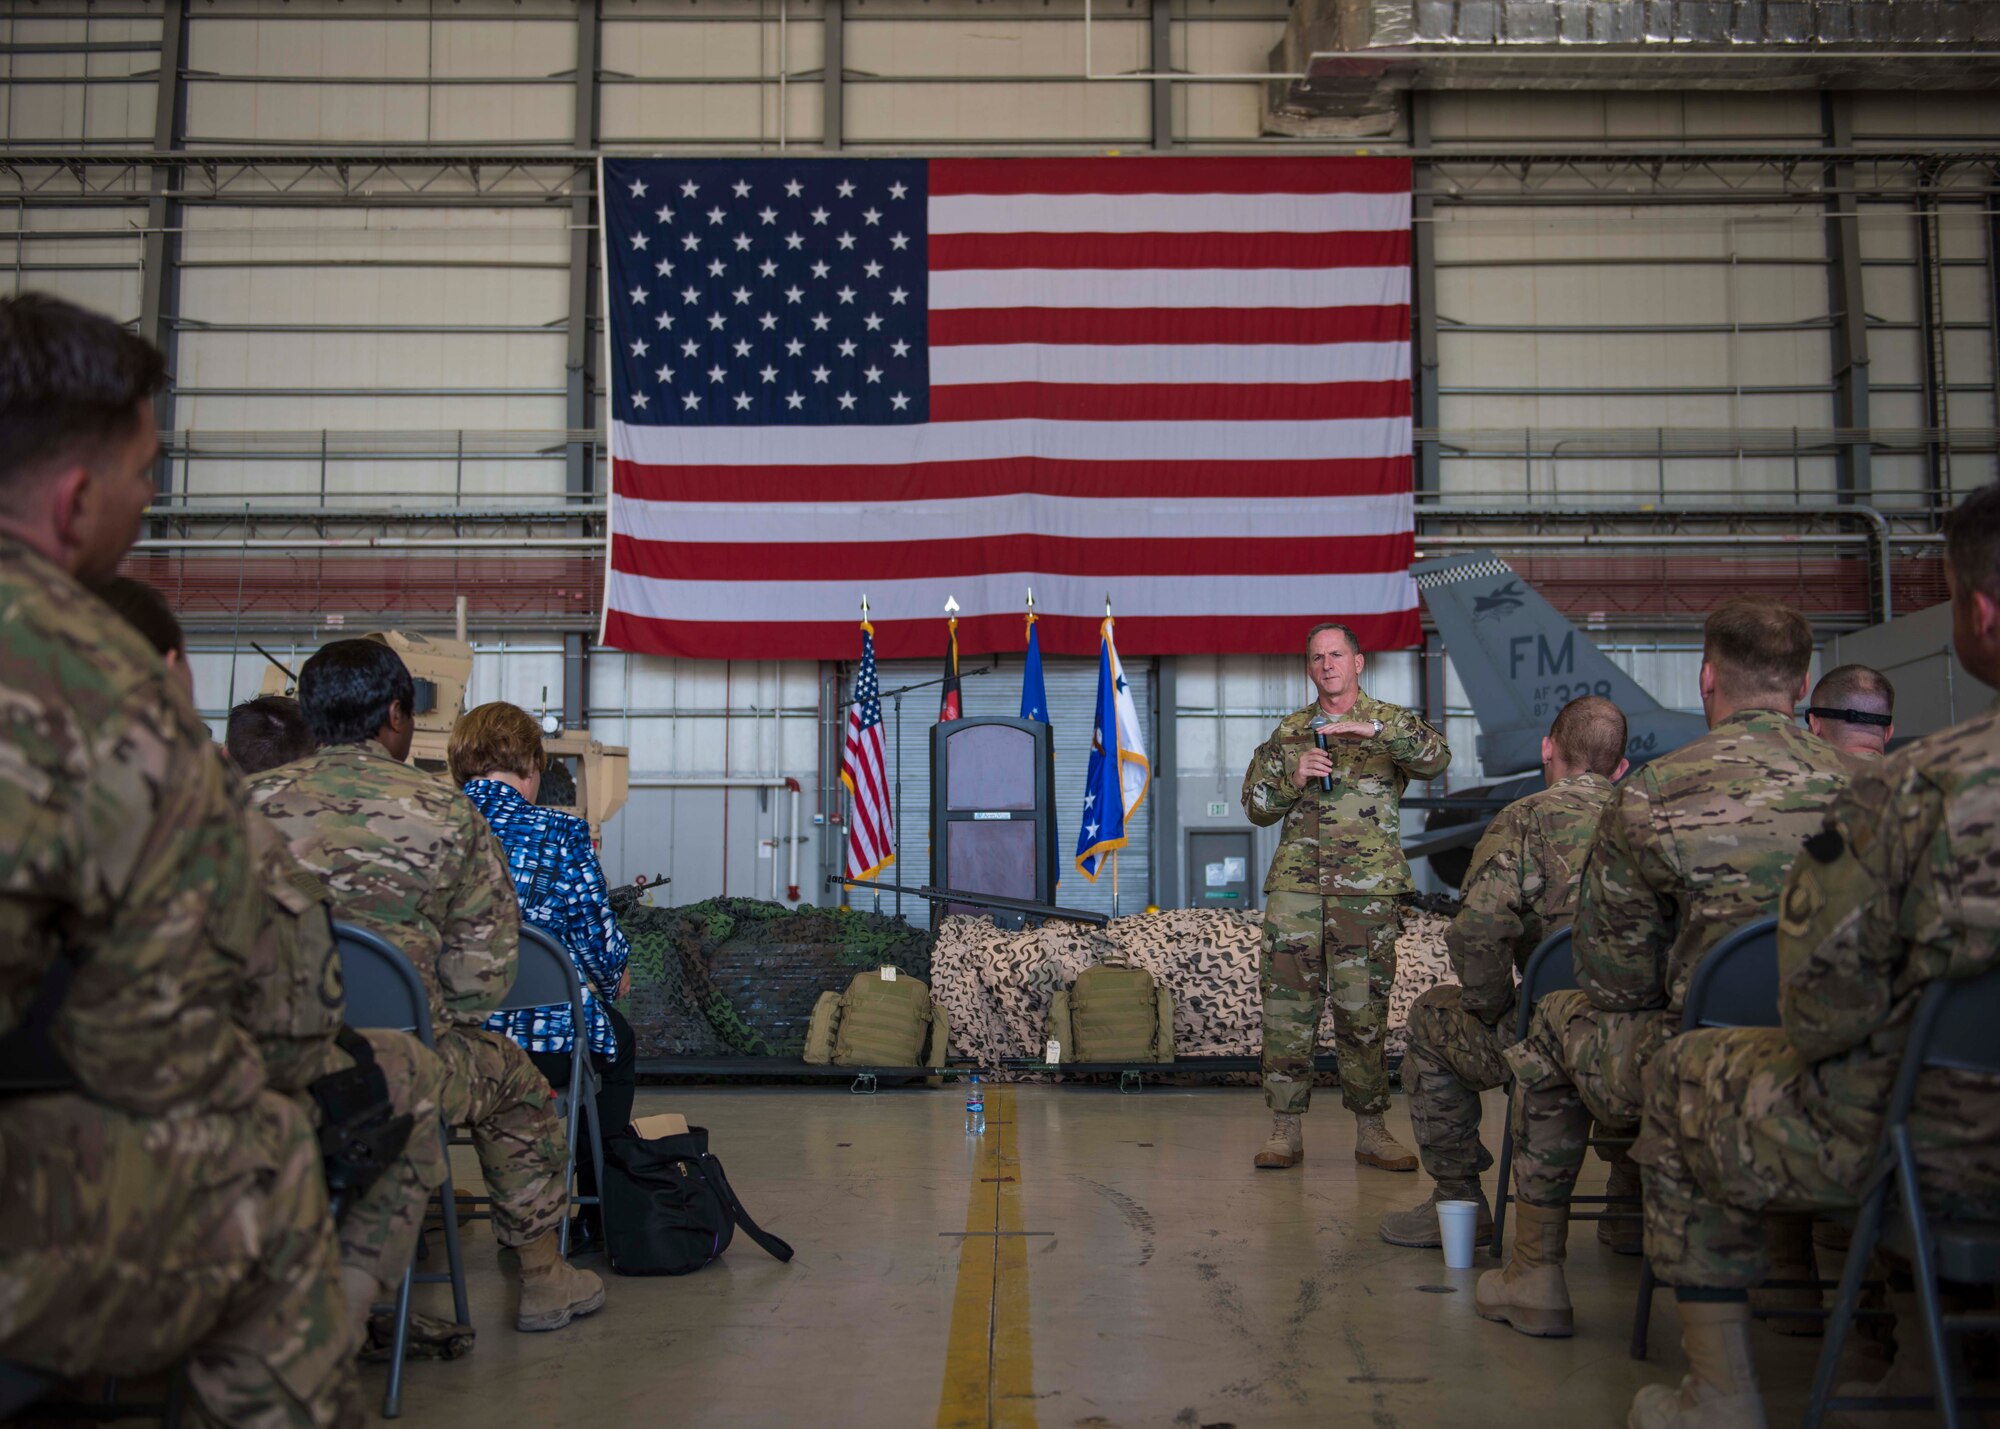 Air Force Chief of Staff Gen. David L. Goldfein speaks during an all call, Bagram Airfield, Afghanistan, Aug. 13, 2016. Goldfein addressed the future of the Air Force, advances in cyber space and increasing readiness. During his visit, he also recognized several Airmen for outstanding performance. (U.S. Air Force photo by Senior Airman Justyn M. Freeman)